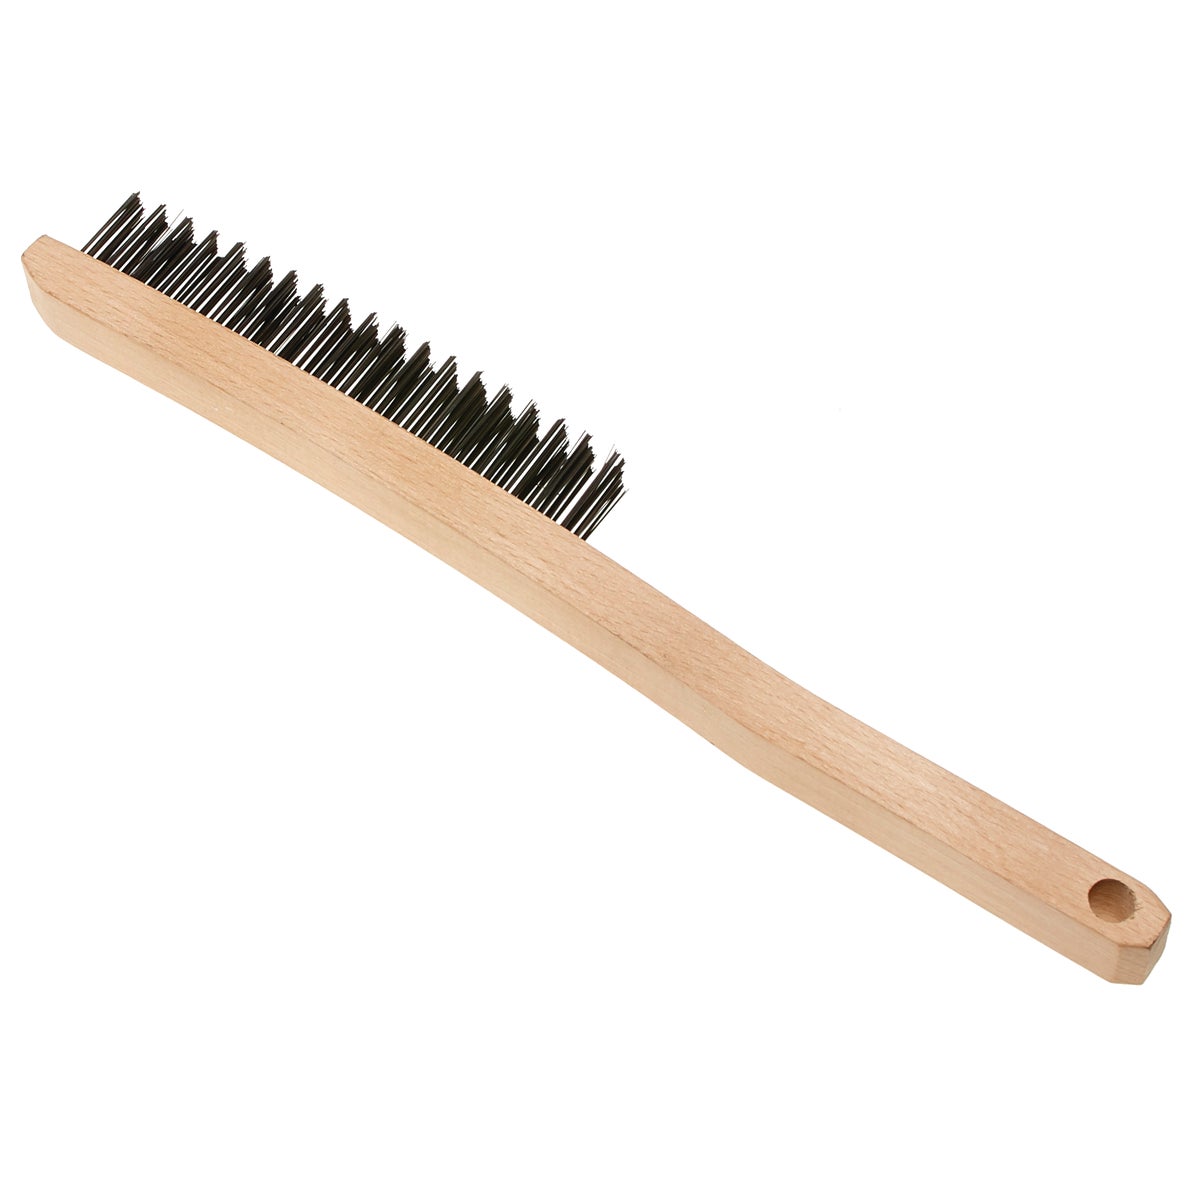 Item 790923, Long handle wire brush for removing rust and flaking, peeling paint.